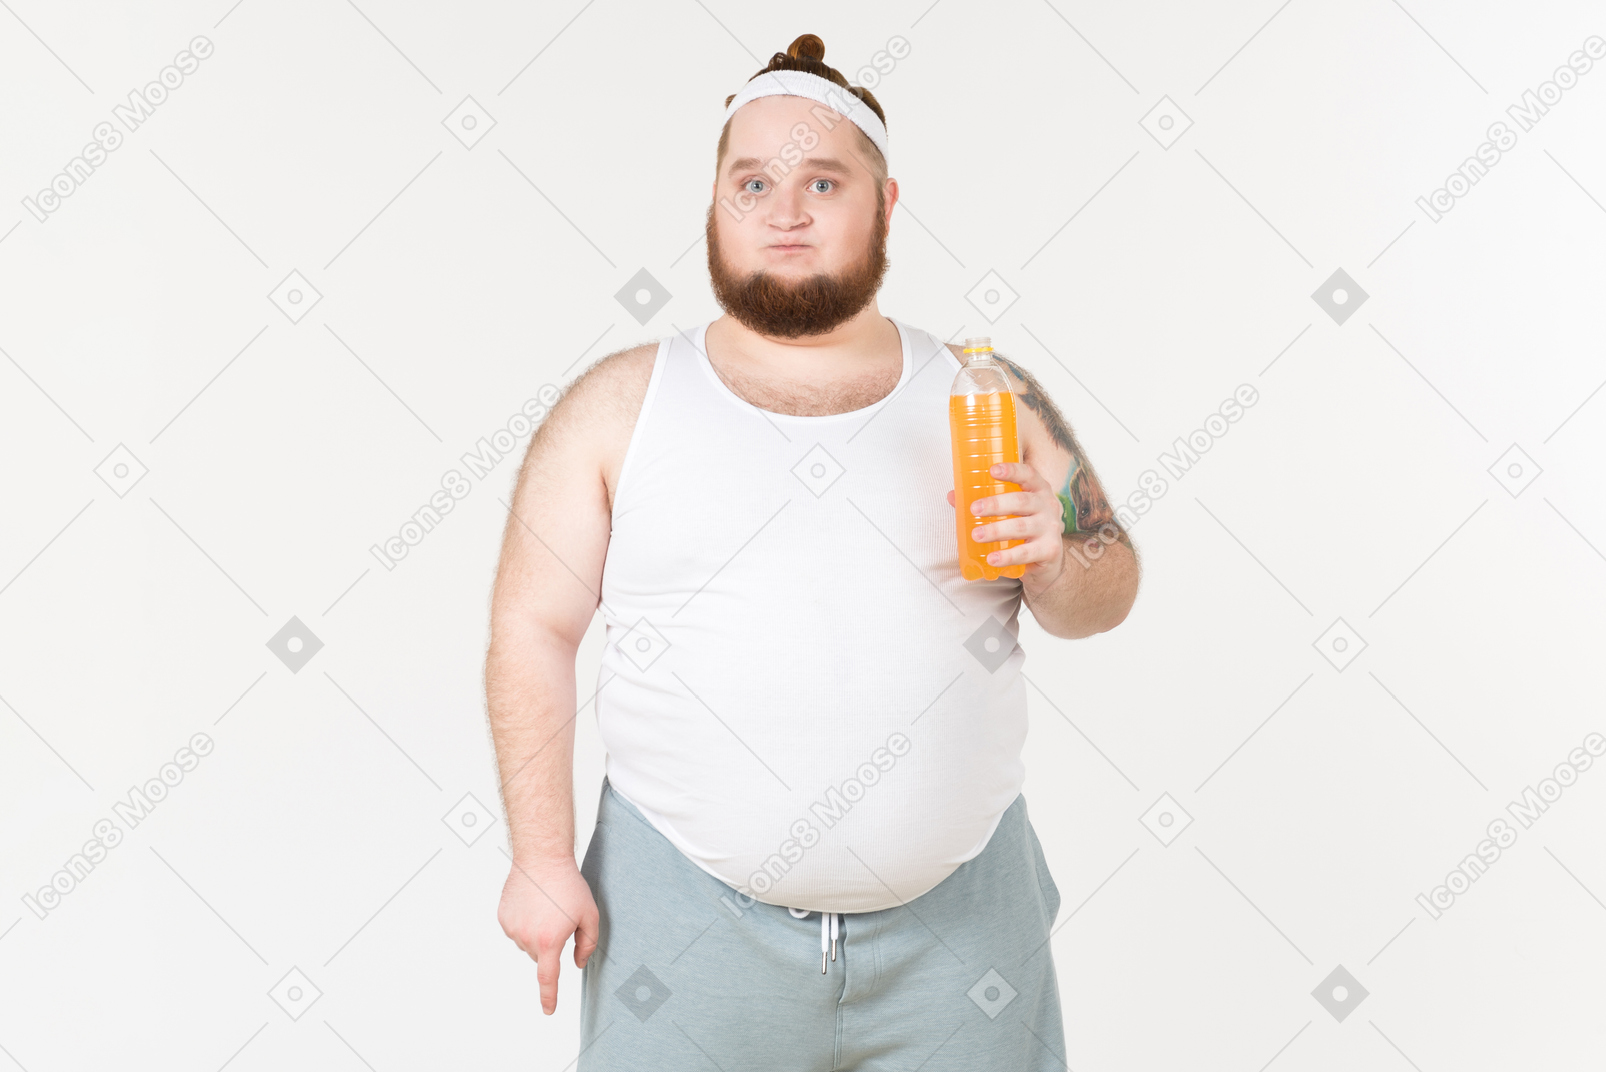 A fat man in sportswear holding a bottle of soft drink with his cheeks puffed out